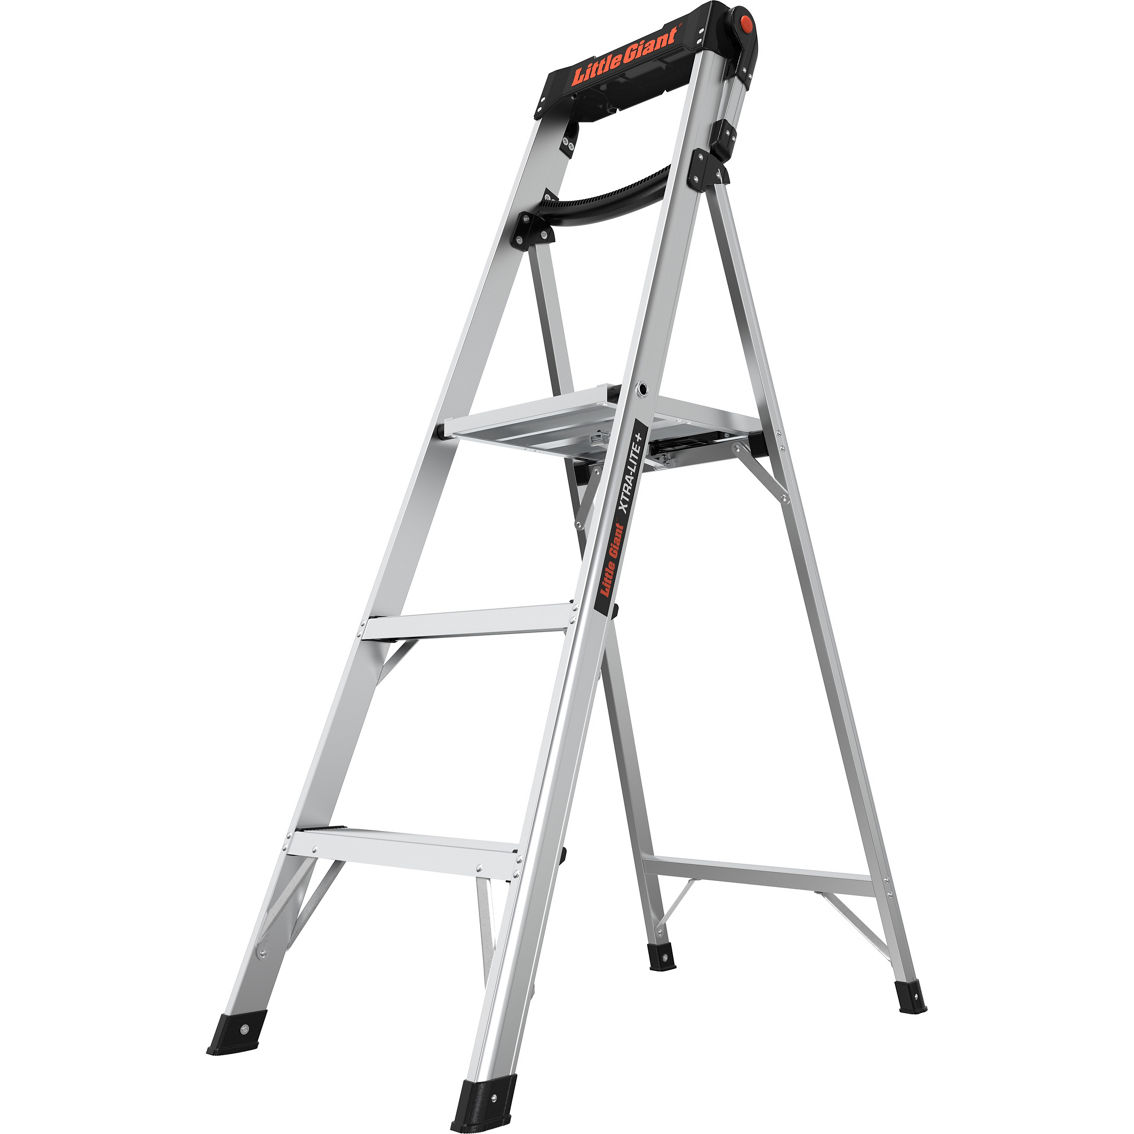 Little Giant Ladders Xtra-Lite Plus 5 ft. Stepladder with Flip-Up Handrail - Image 2 of 3